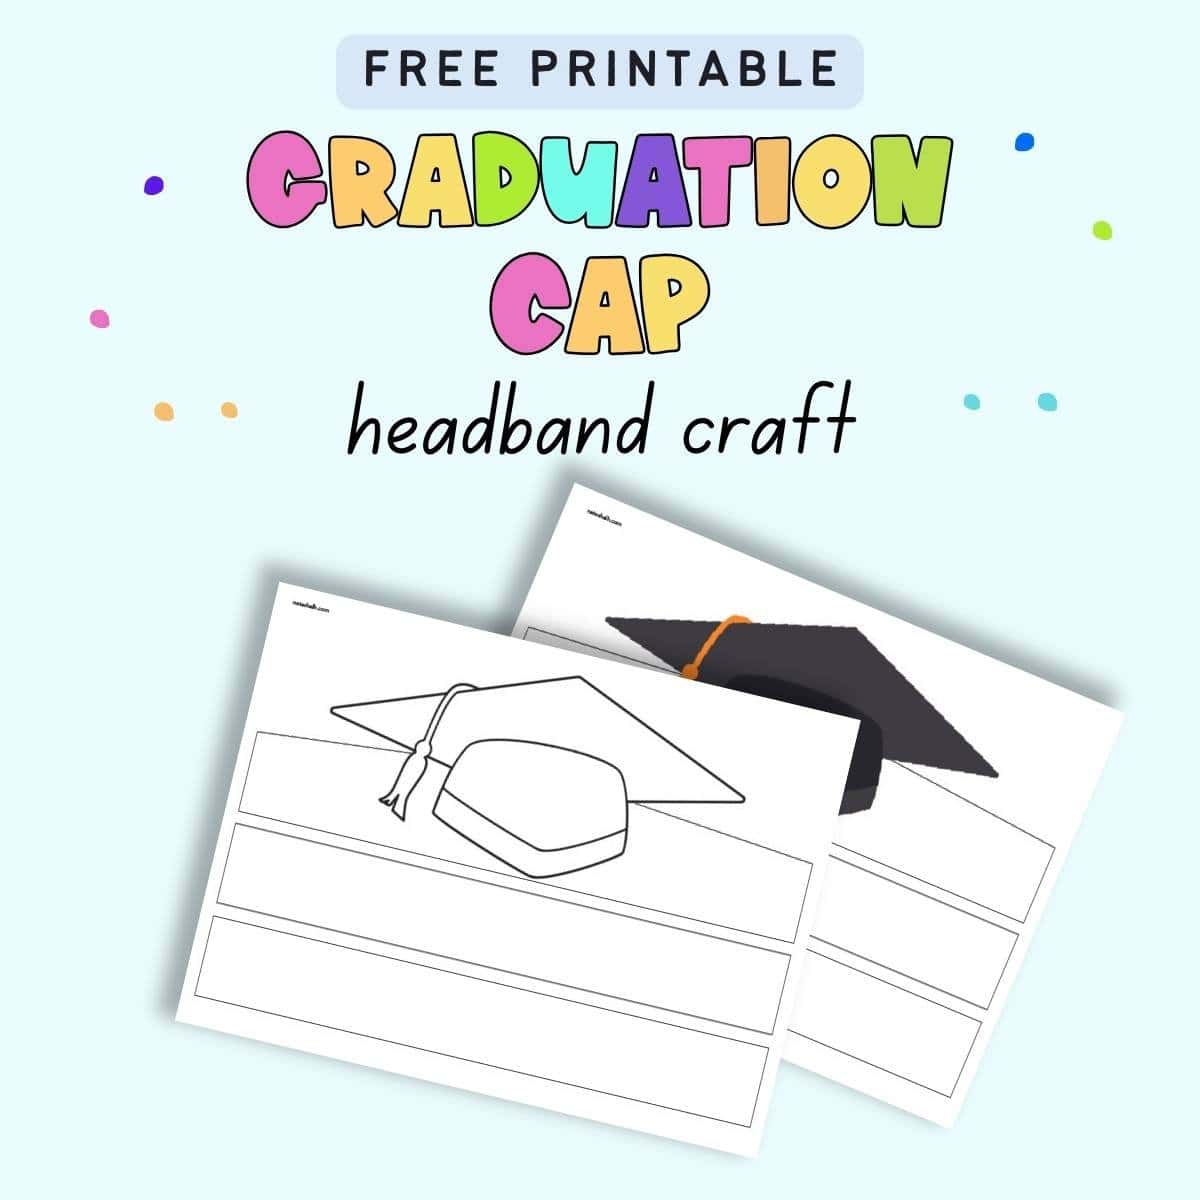 Text "free printabel graduation cap headband craft" with two pages of graduation cap crown printable. One is white and the other black.